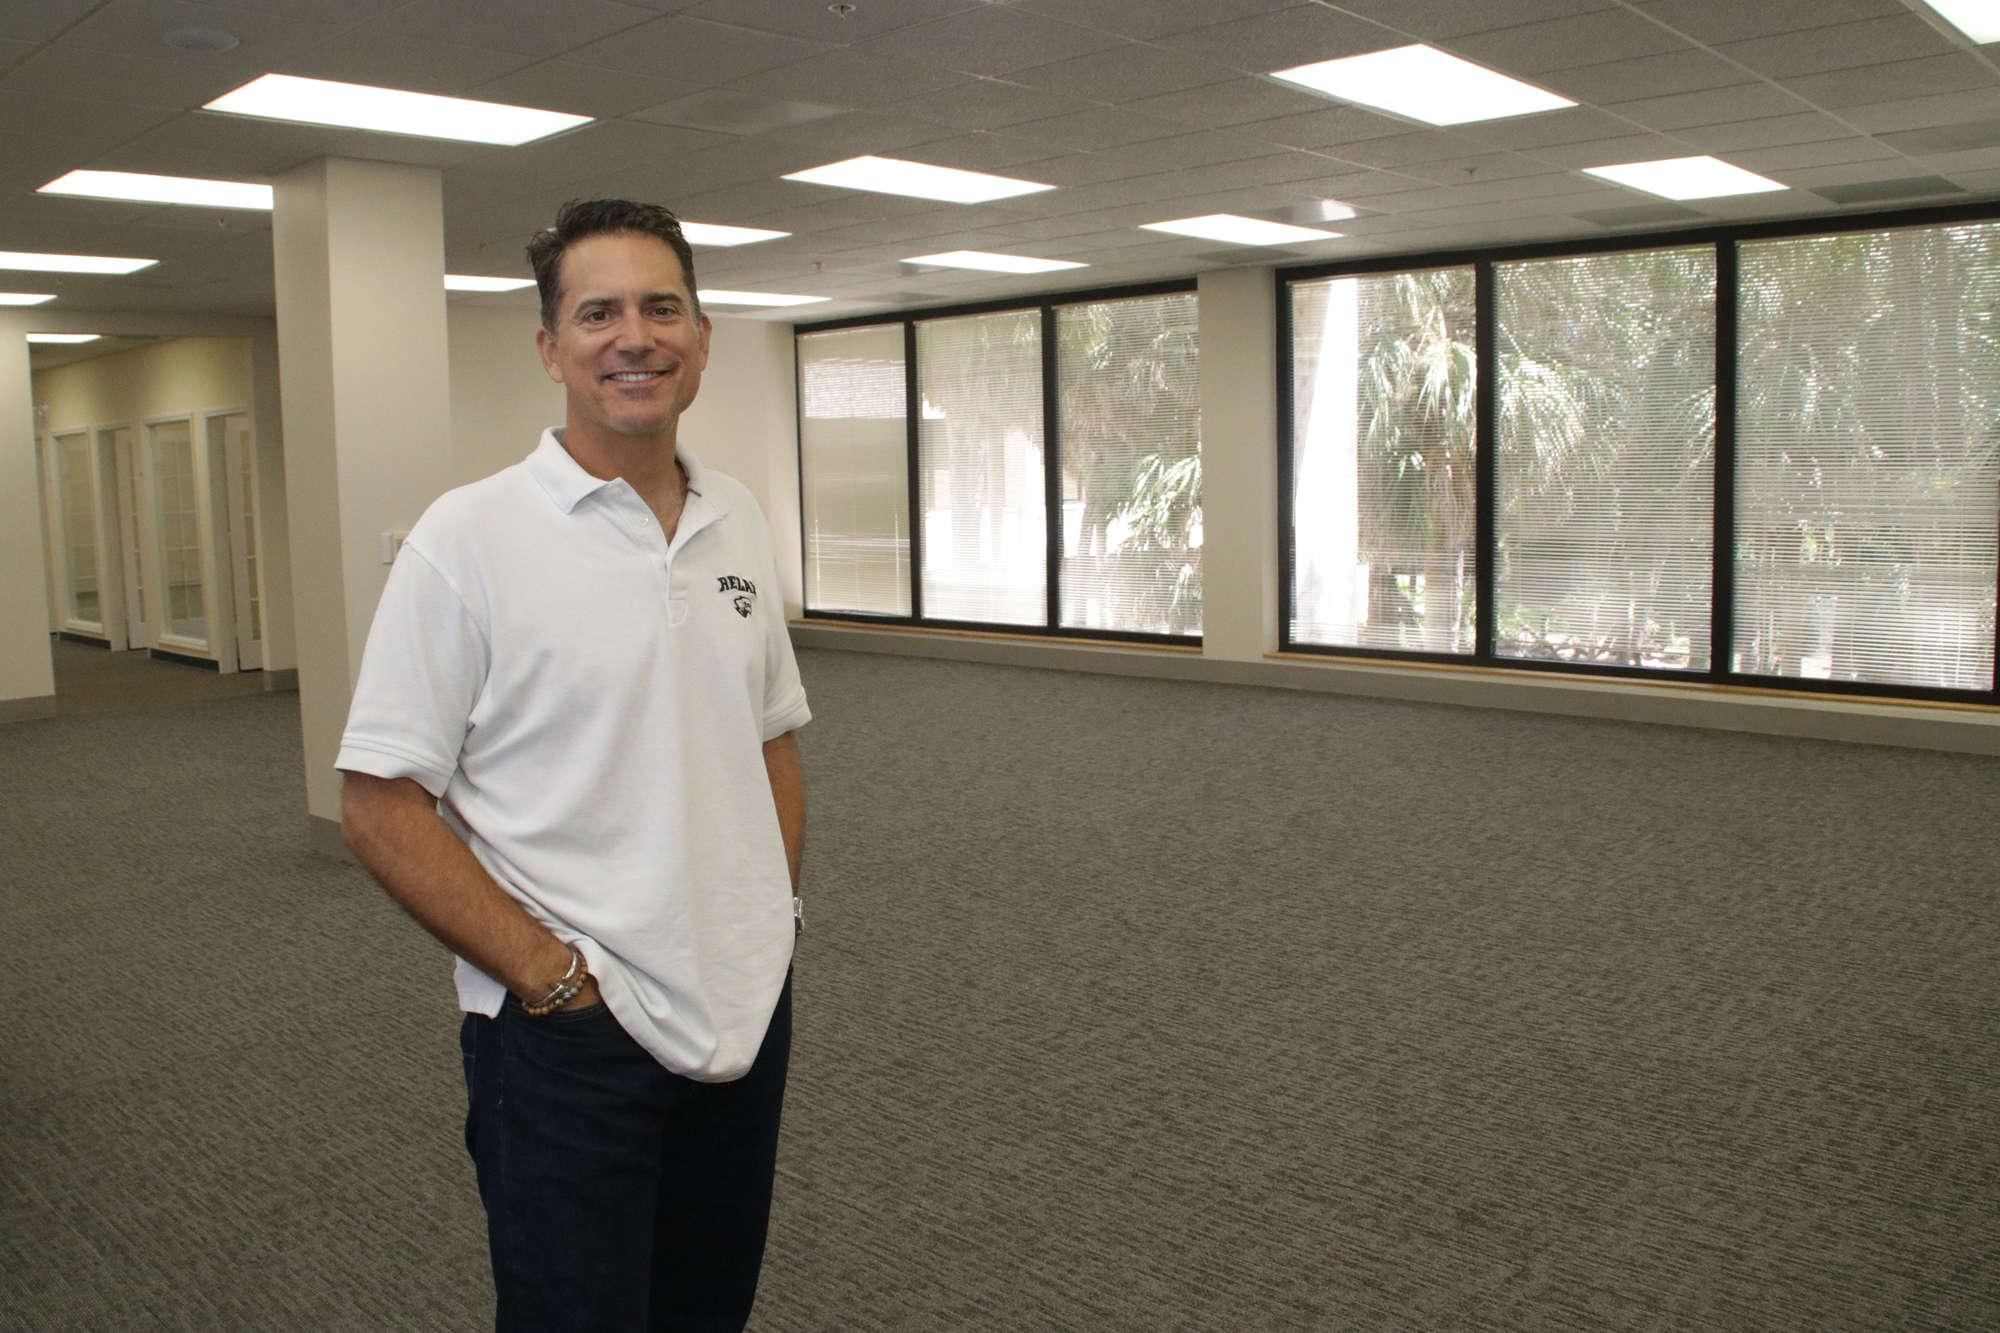 Fuel Capital is occupying only about 20 percent of the 10,000 square feet the company is leasing in Naples. President and CEO Peter Wasmer plans to grow the company to more than 100 employees within five years. JimJett.com photo